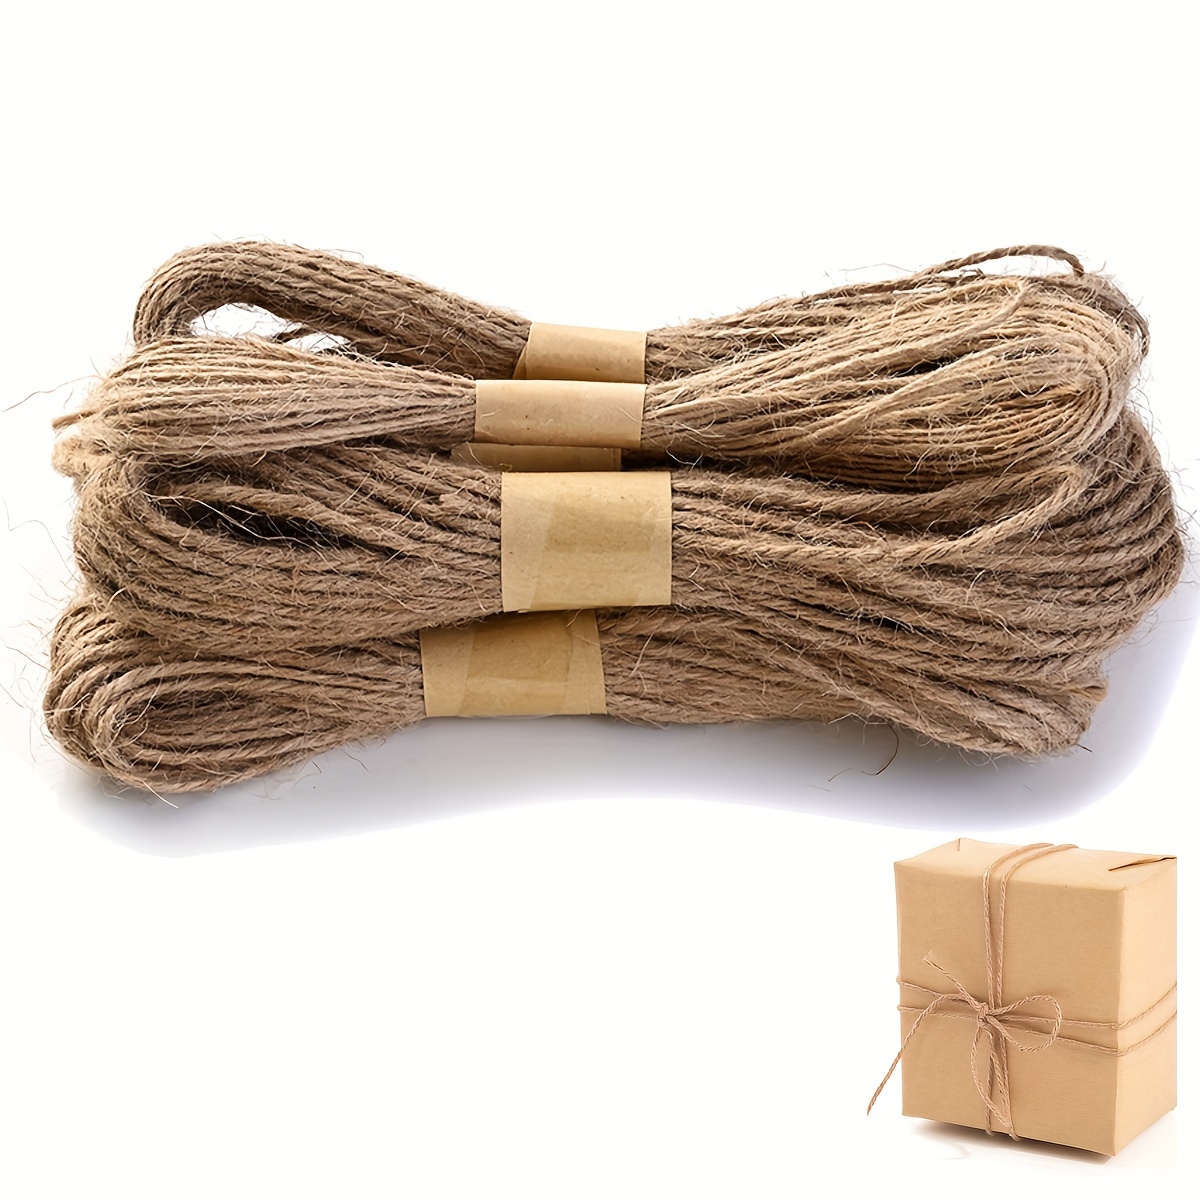 1 Roll, 328Ft Jute Twine String Thin Natural Hemp Twine For Gift Wrapping  Craft Plant Garden Christmas Handmade Arts Decoration Packing String Home De